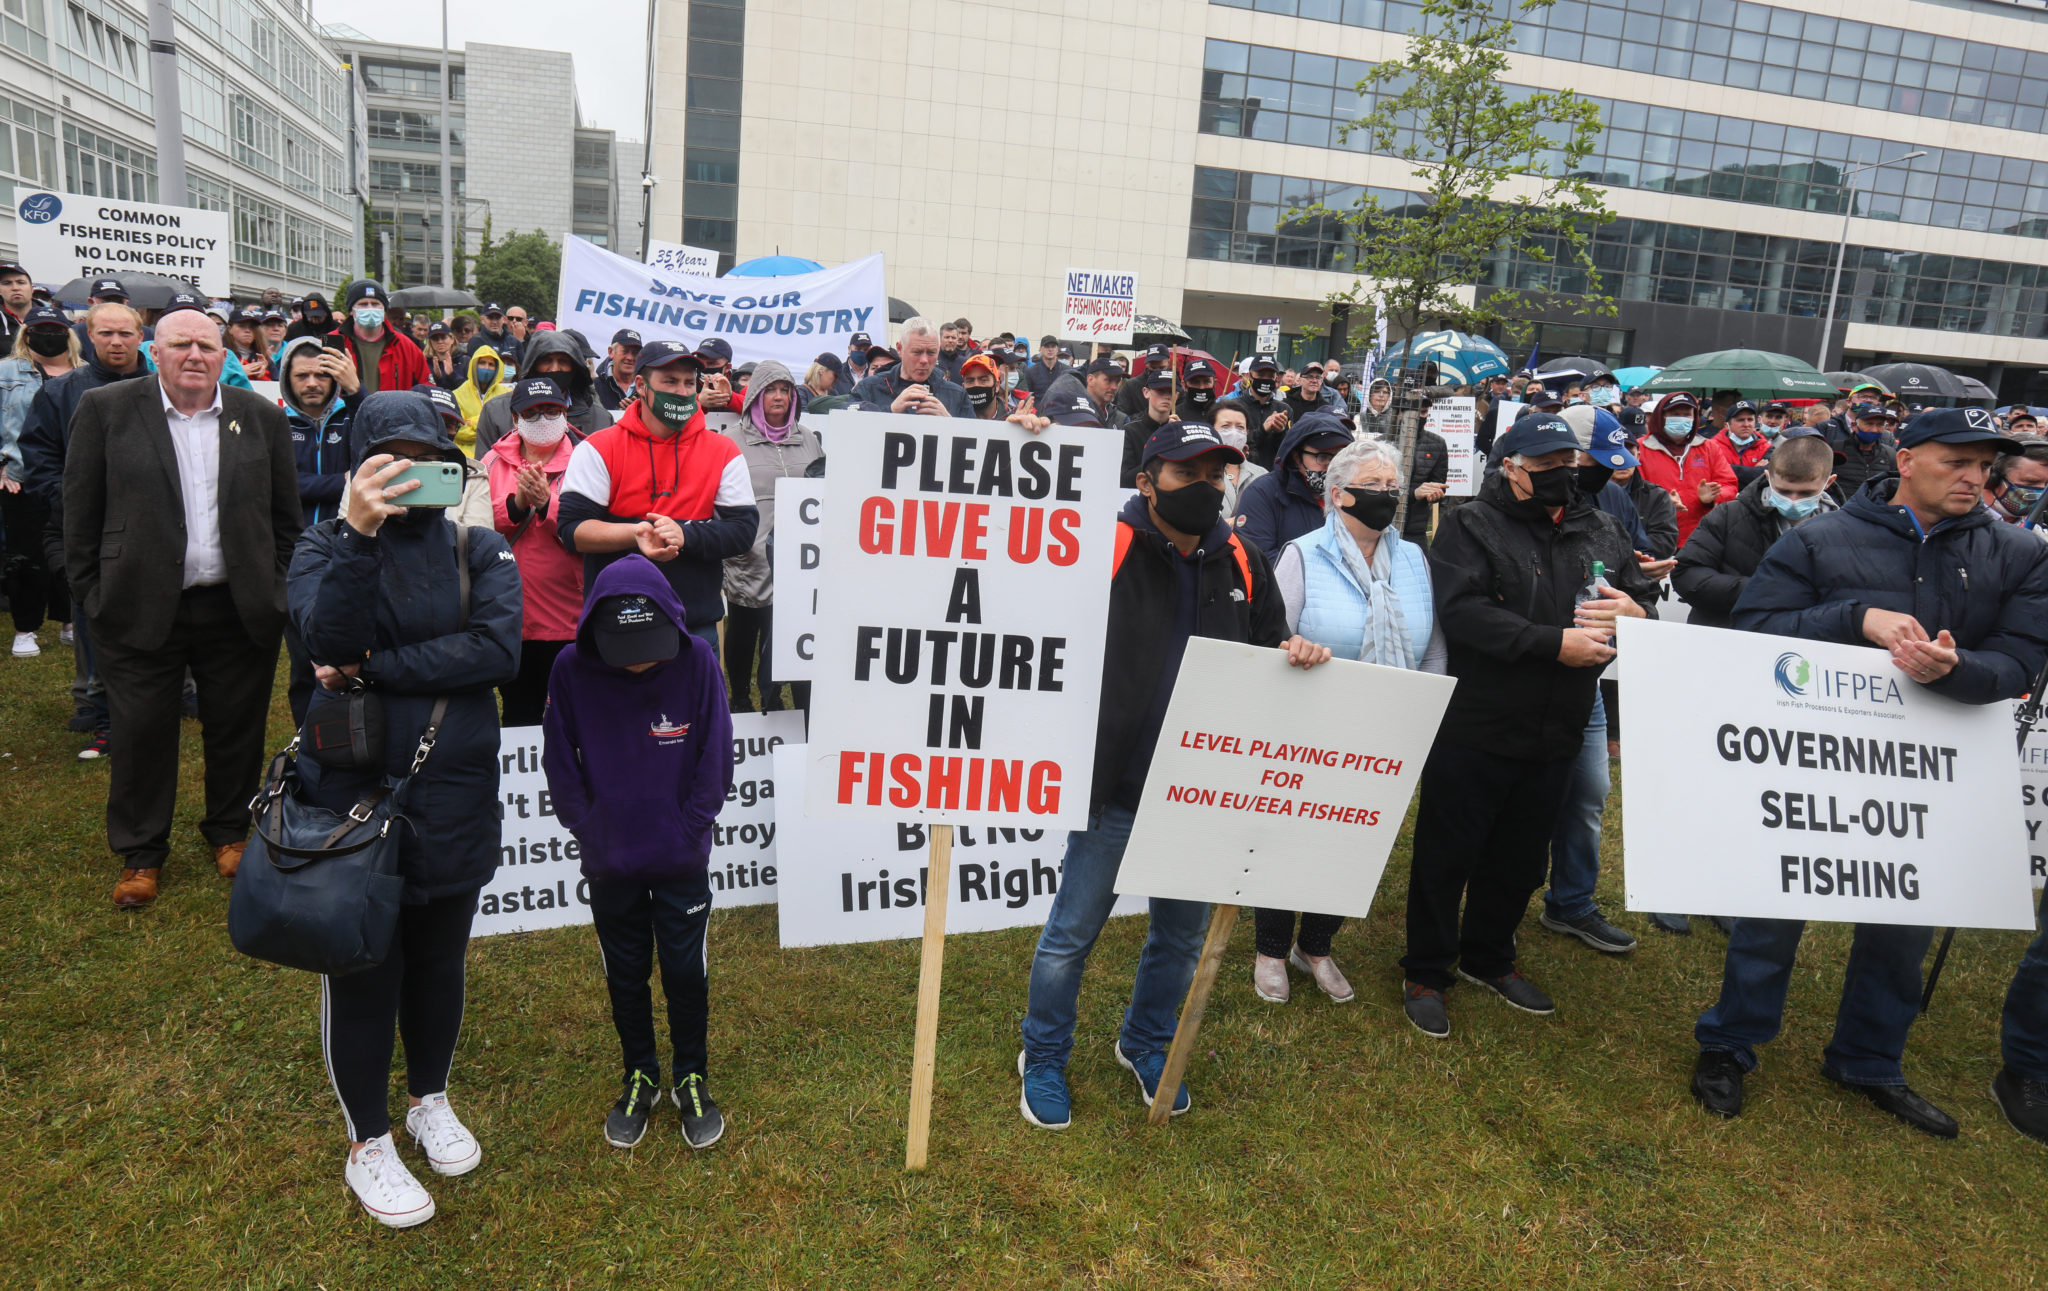 Pictured are fishermen carrying signs and banners as they protest outside a meeting of the Dail in Dublin